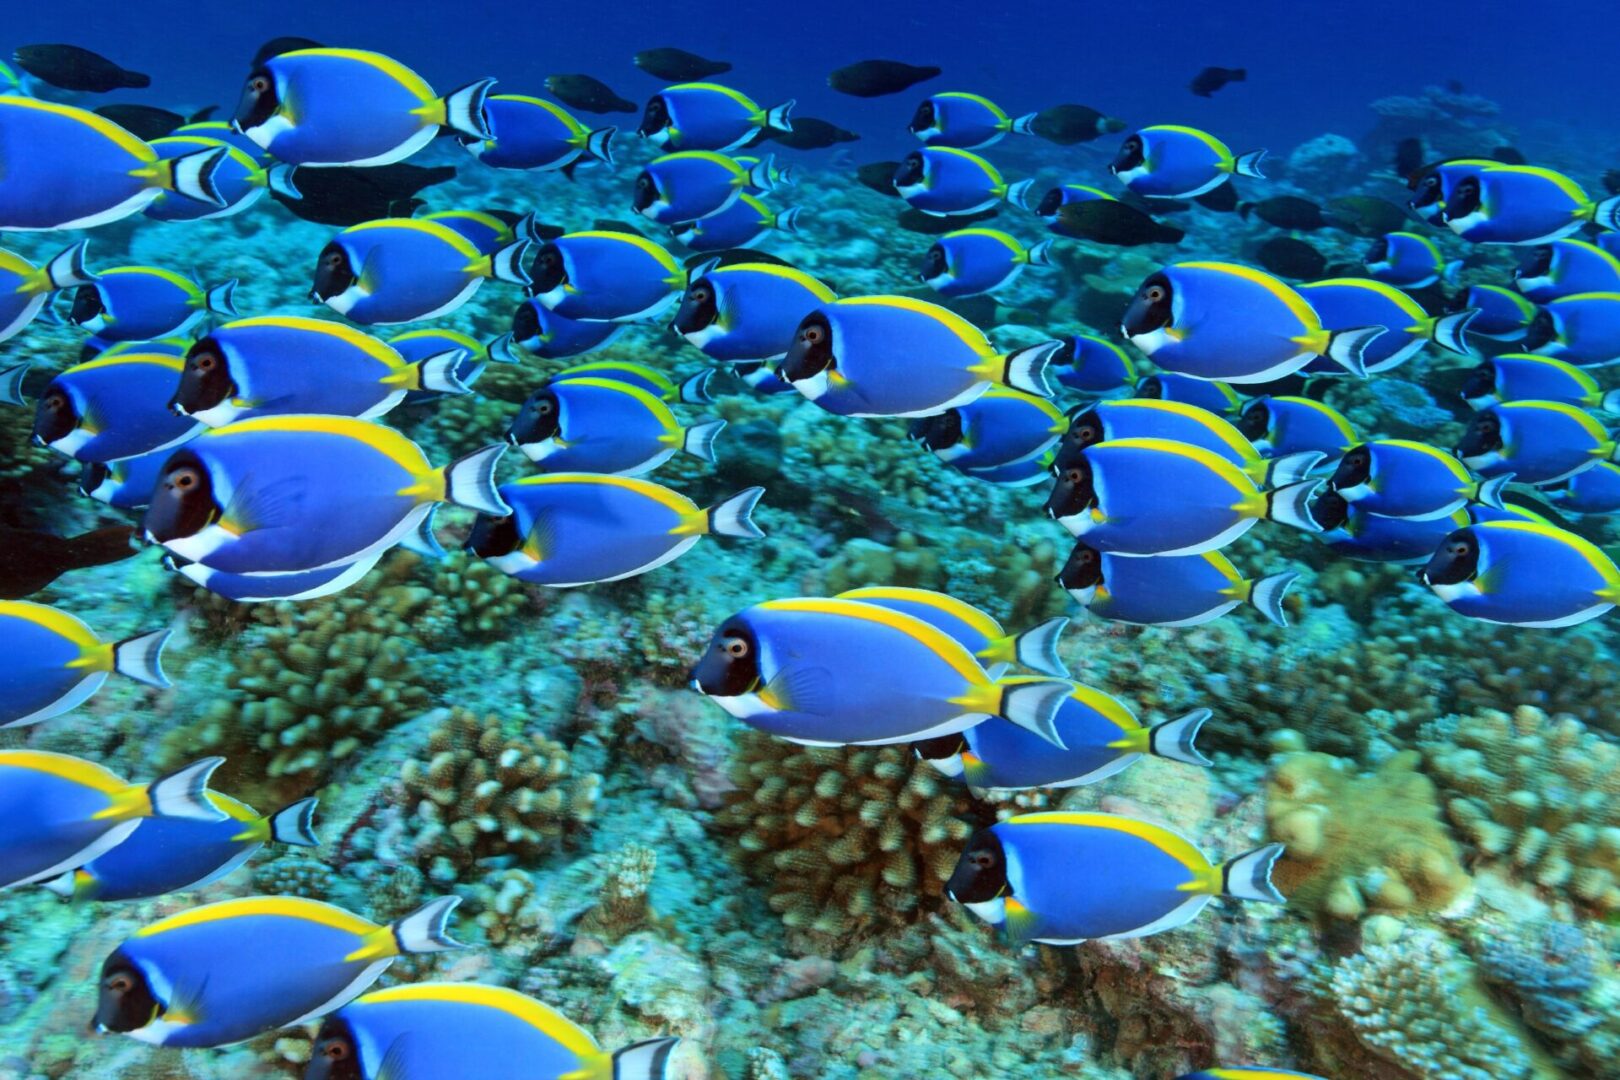 A flock of blue and yellow fish swimming in the ocean.